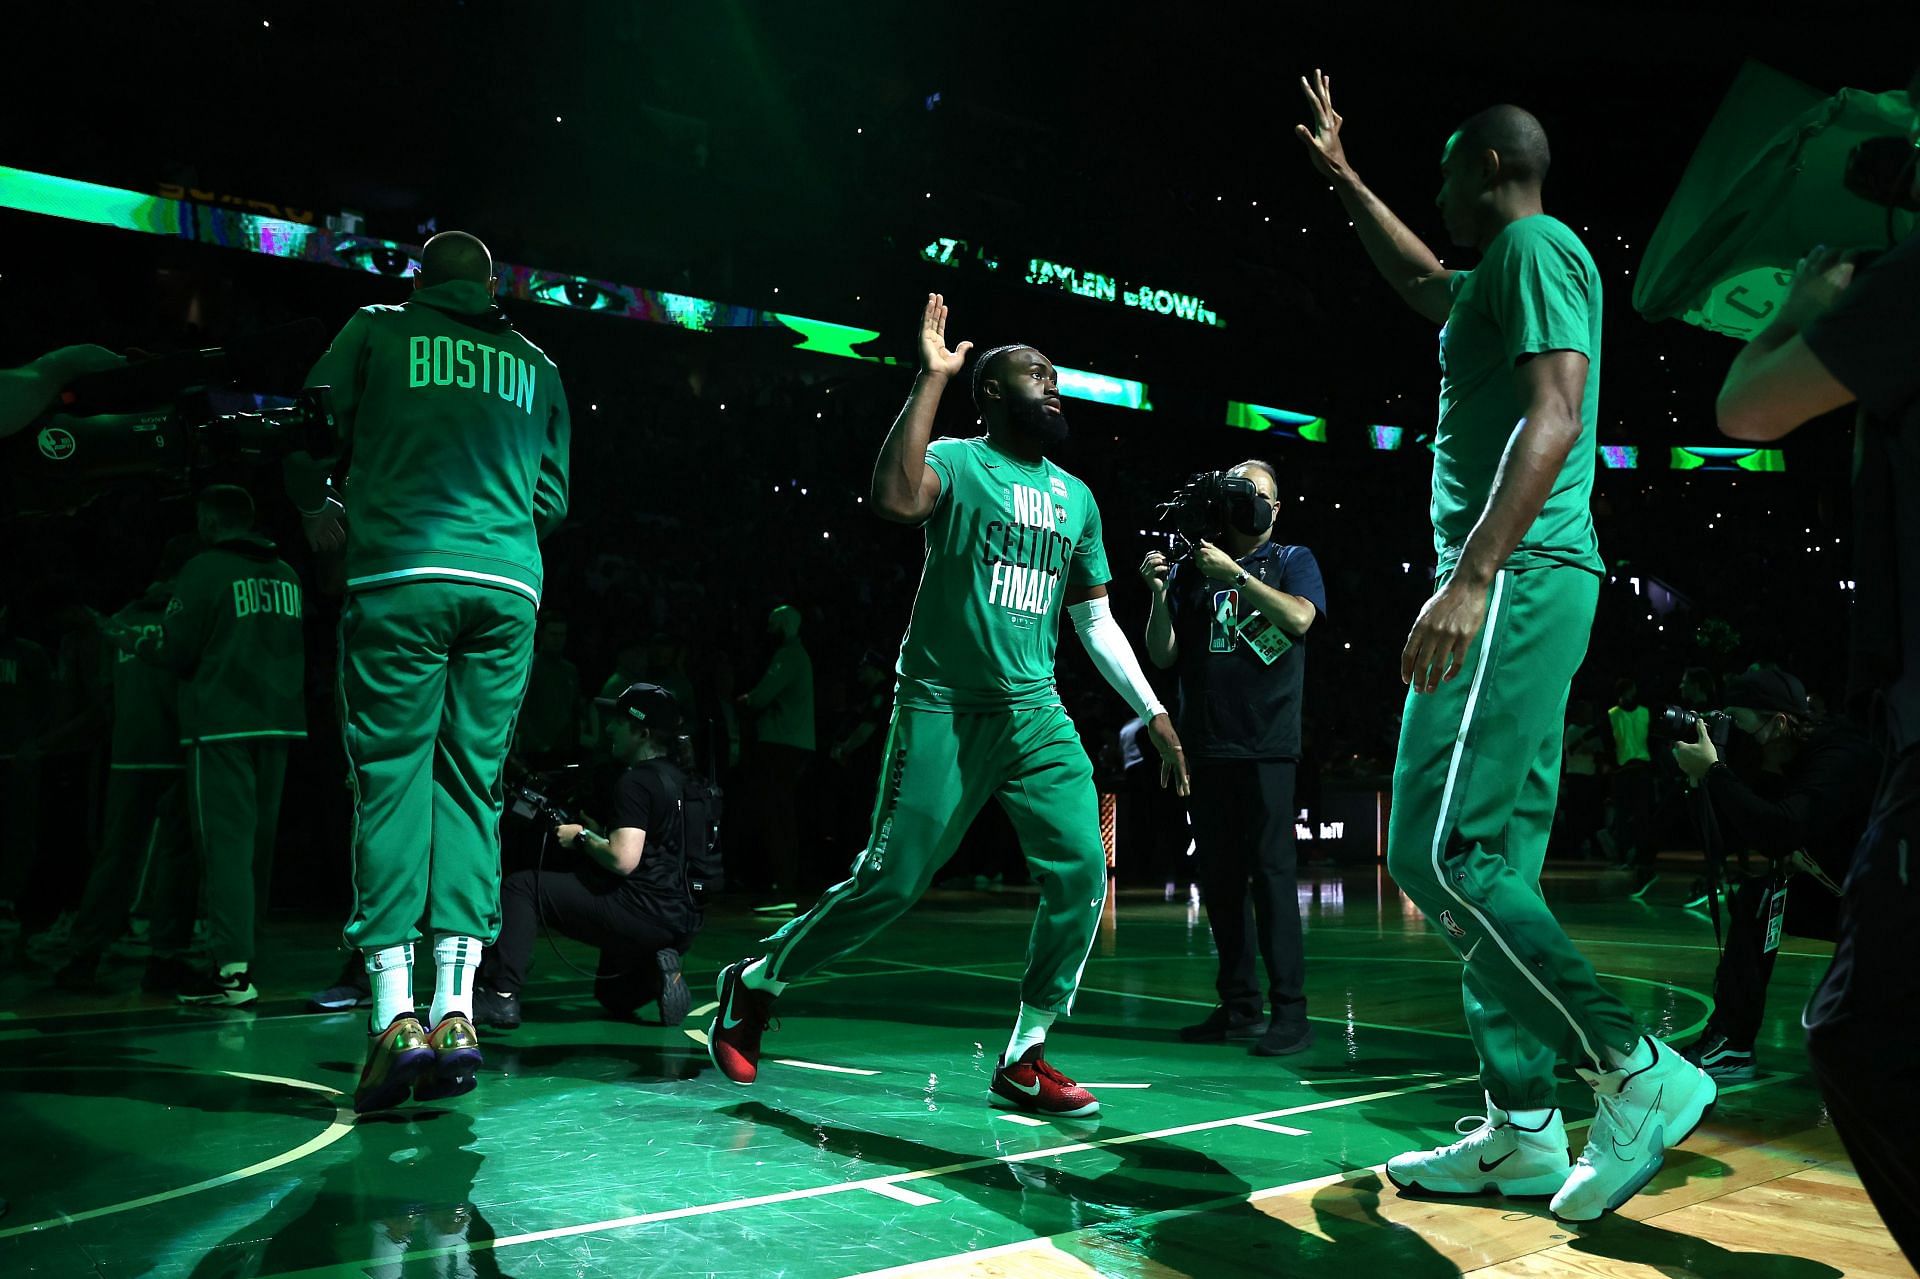 Jaylen Brown walks out during the player introductions.